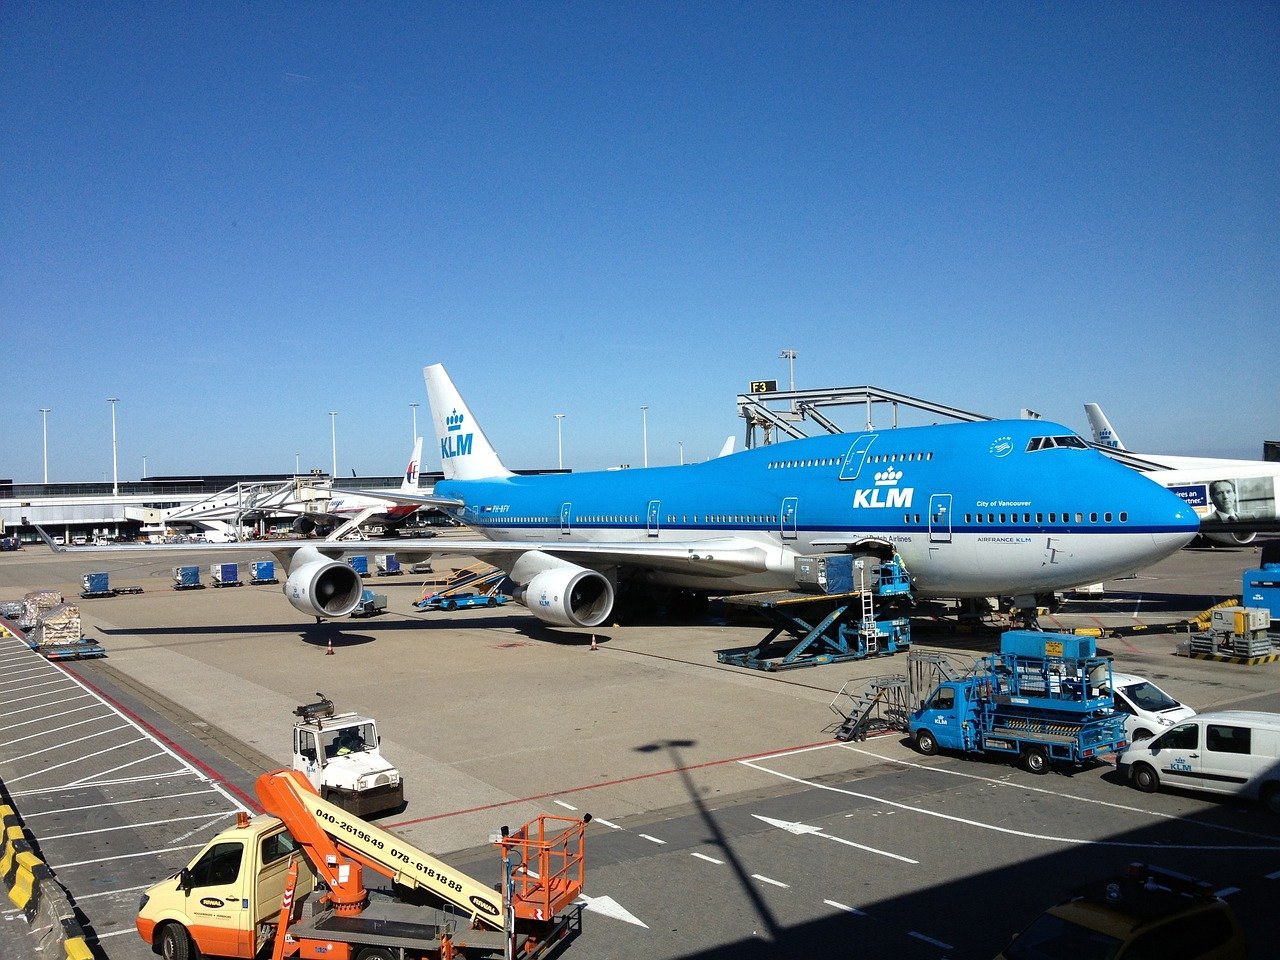 How to contact KLM Airlines customer service?